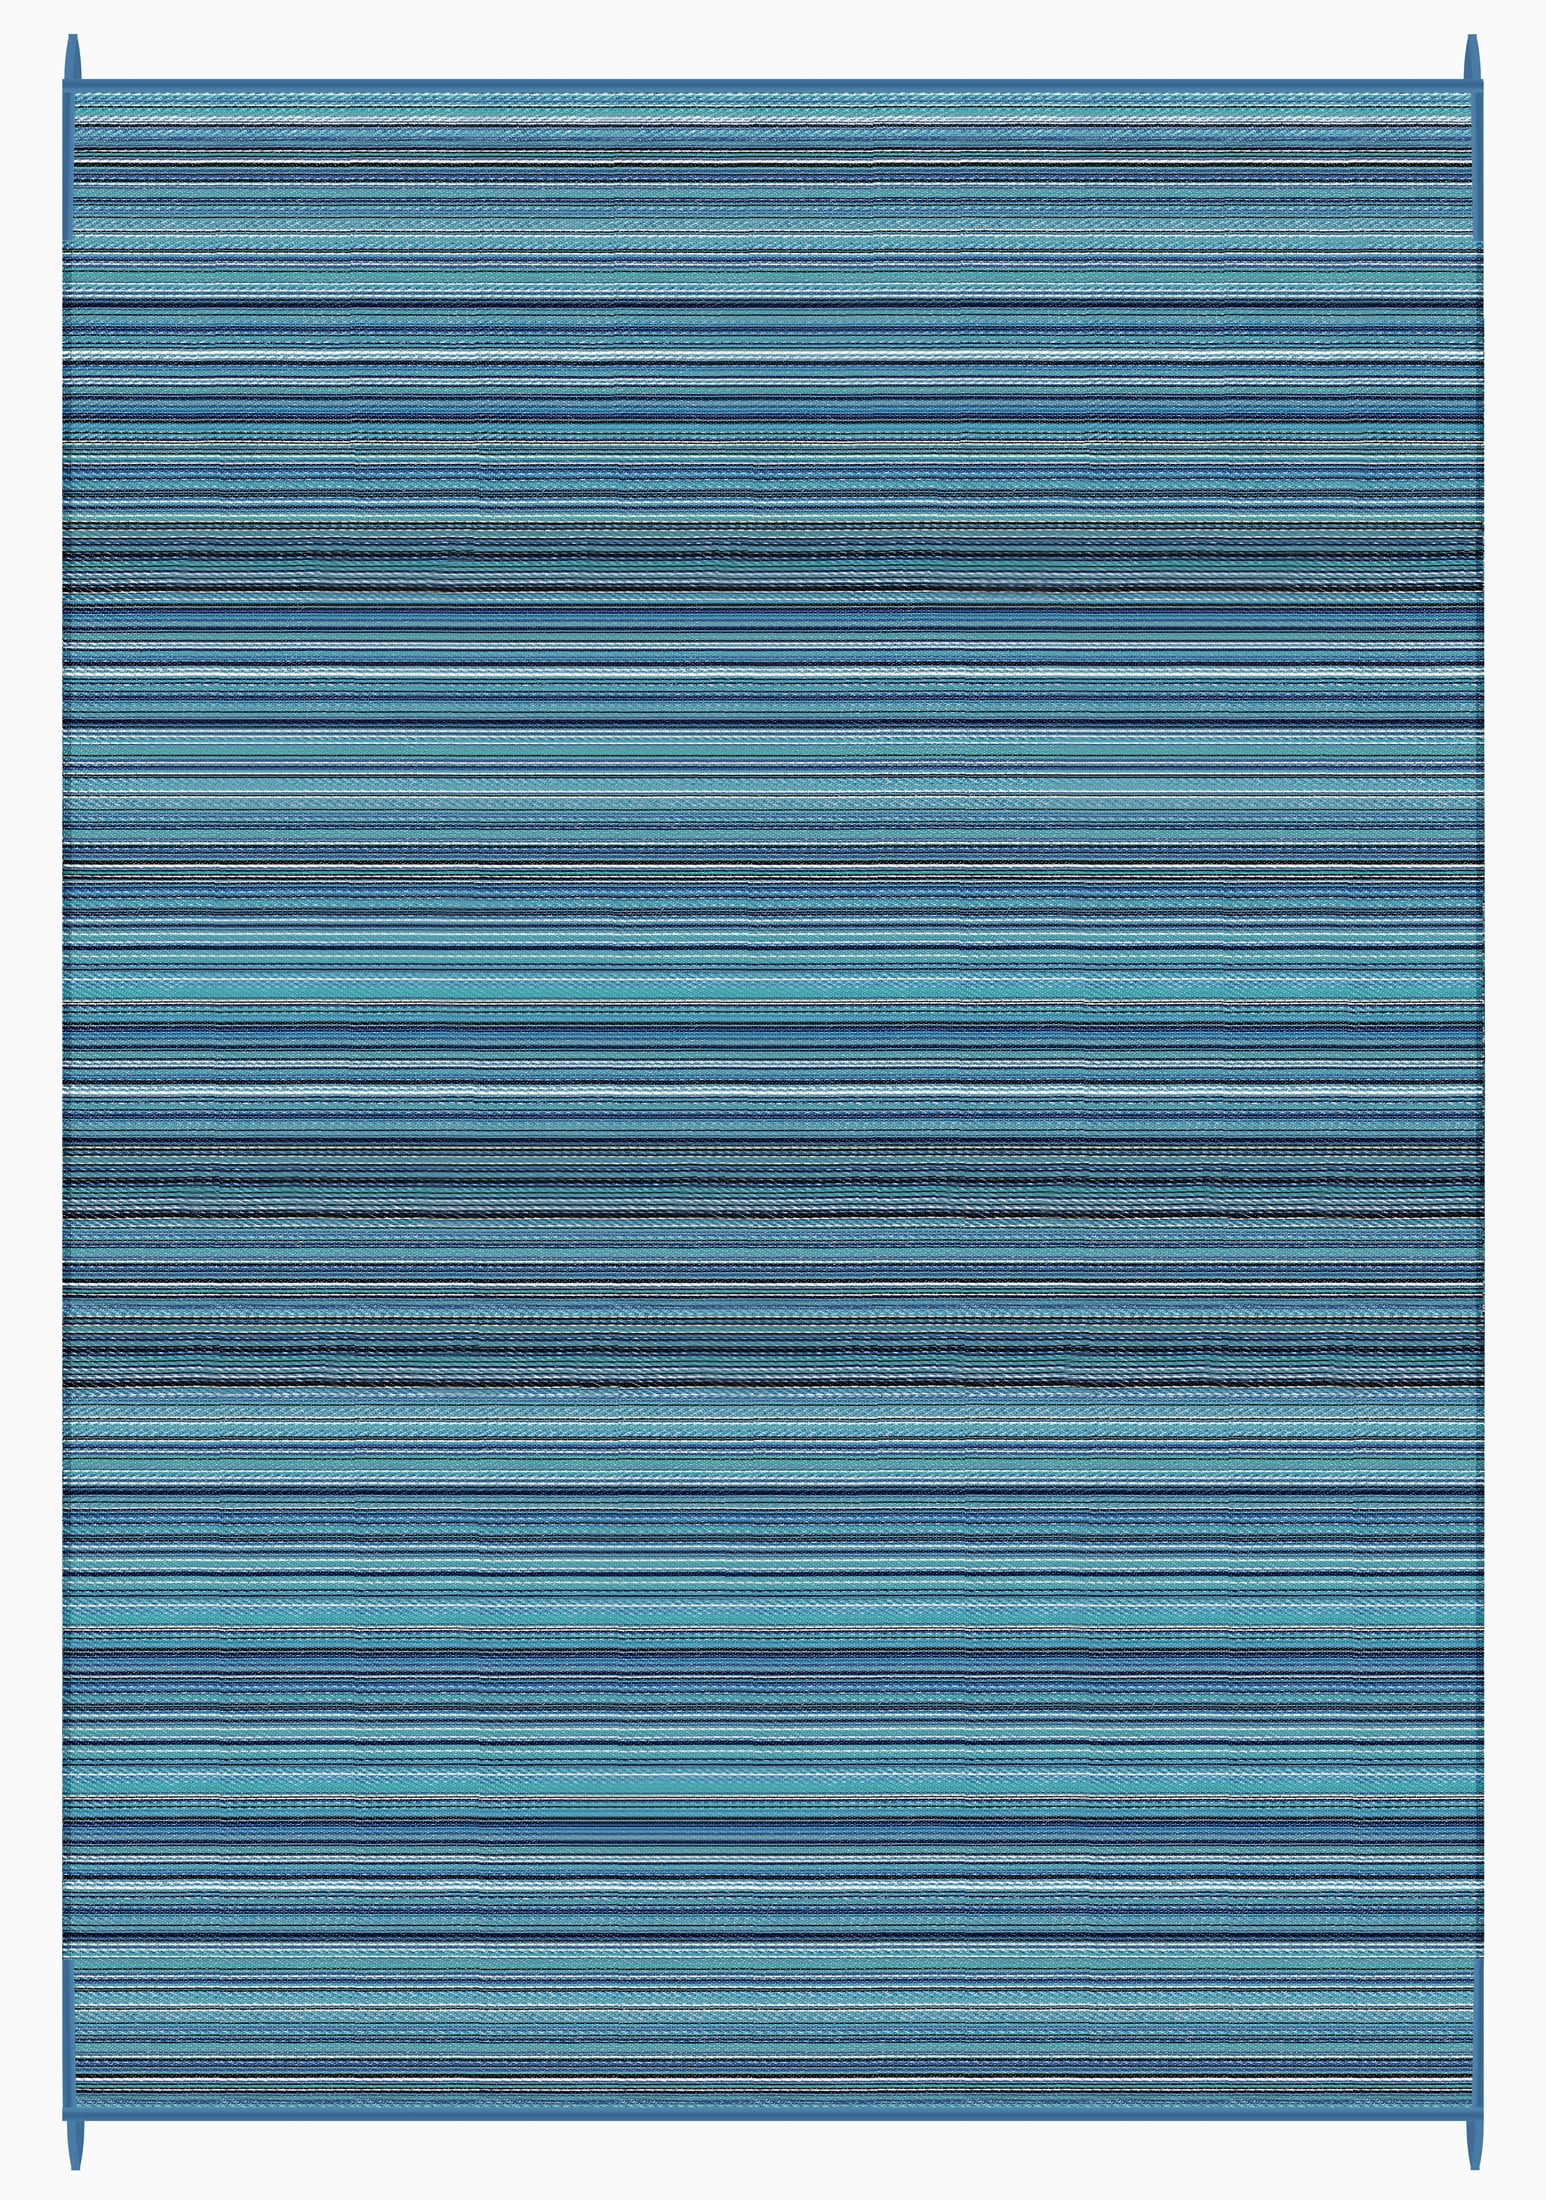 FH Home Outdoor Rug - Waterproof, Fade Resistant, Crease-Free - Premium  Recycled Plastic - Striped - Patio, Deck, Porch, Balcony - Havana -  Turquoise